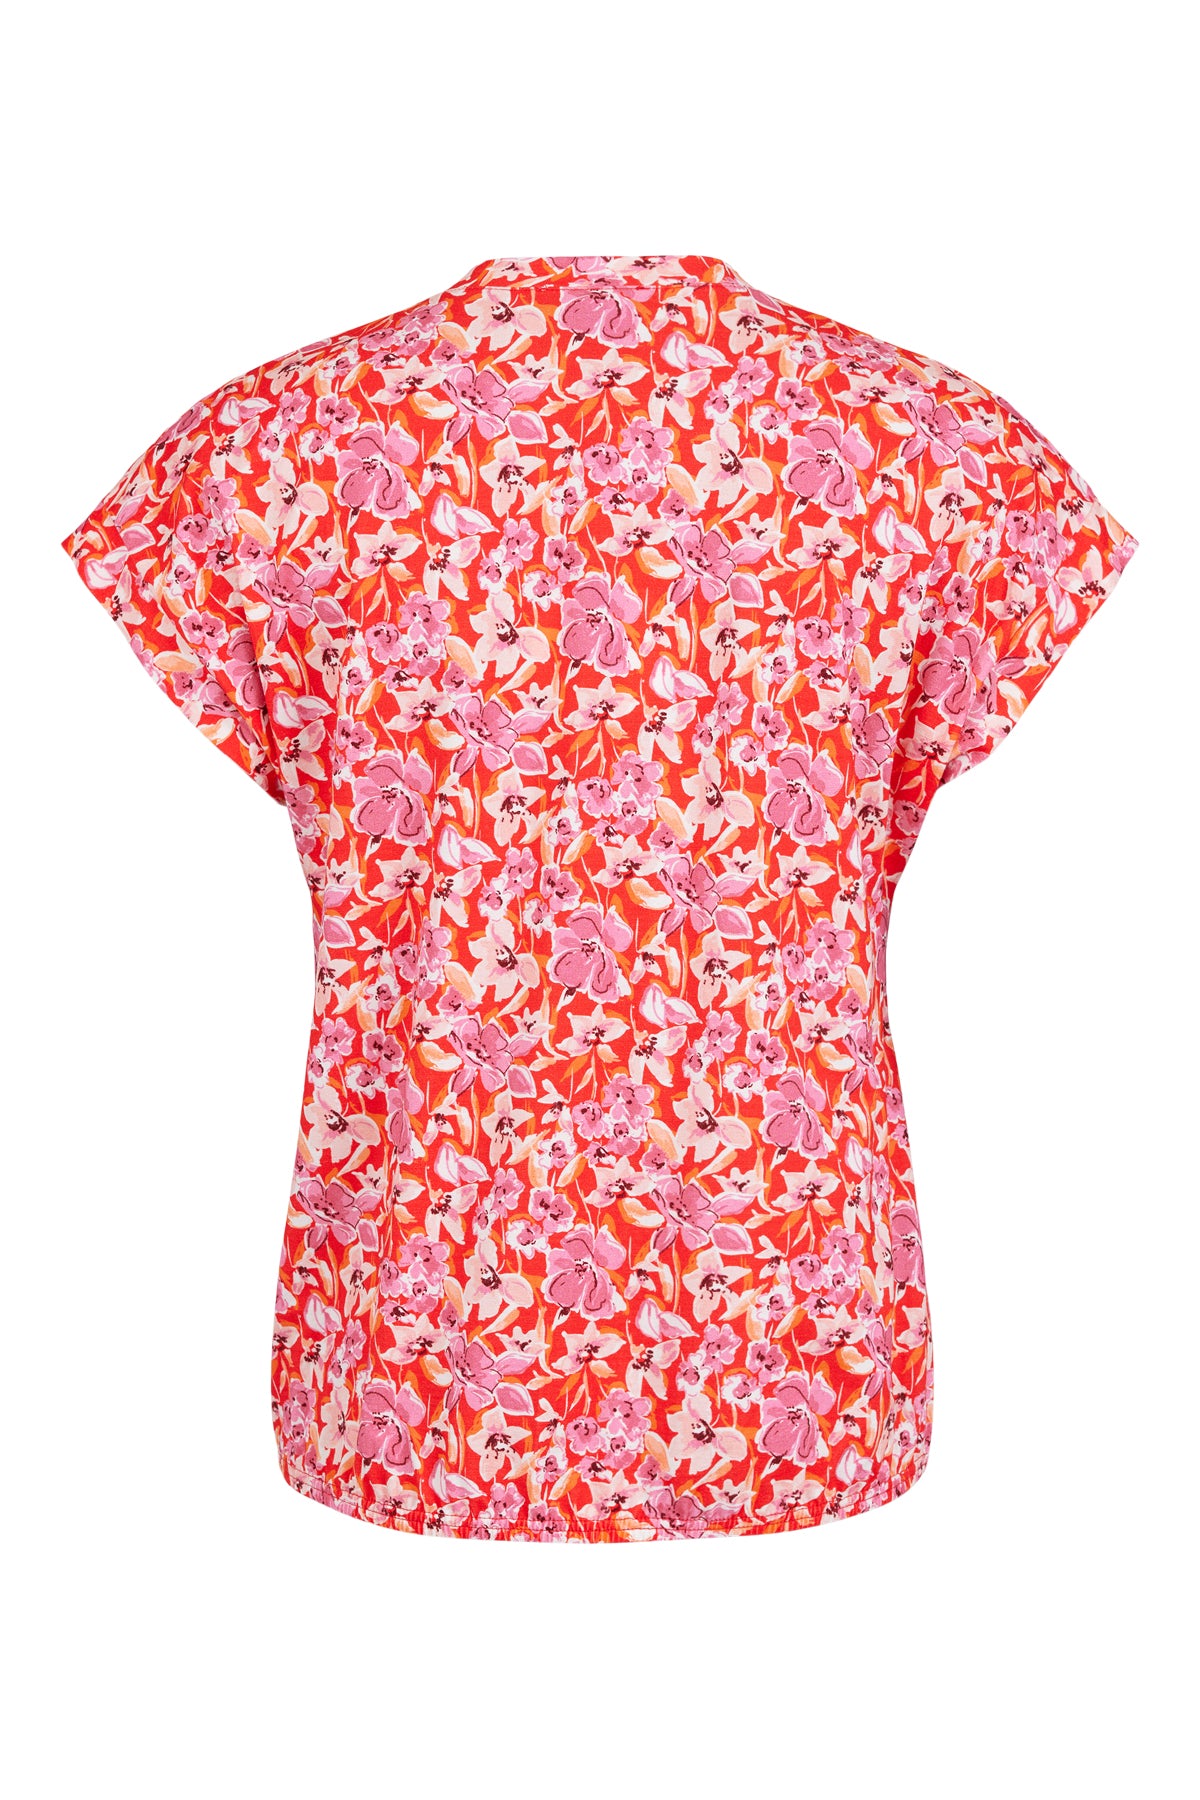 Orange Top With Pink Flower Print & Grandfather Collar Detailing